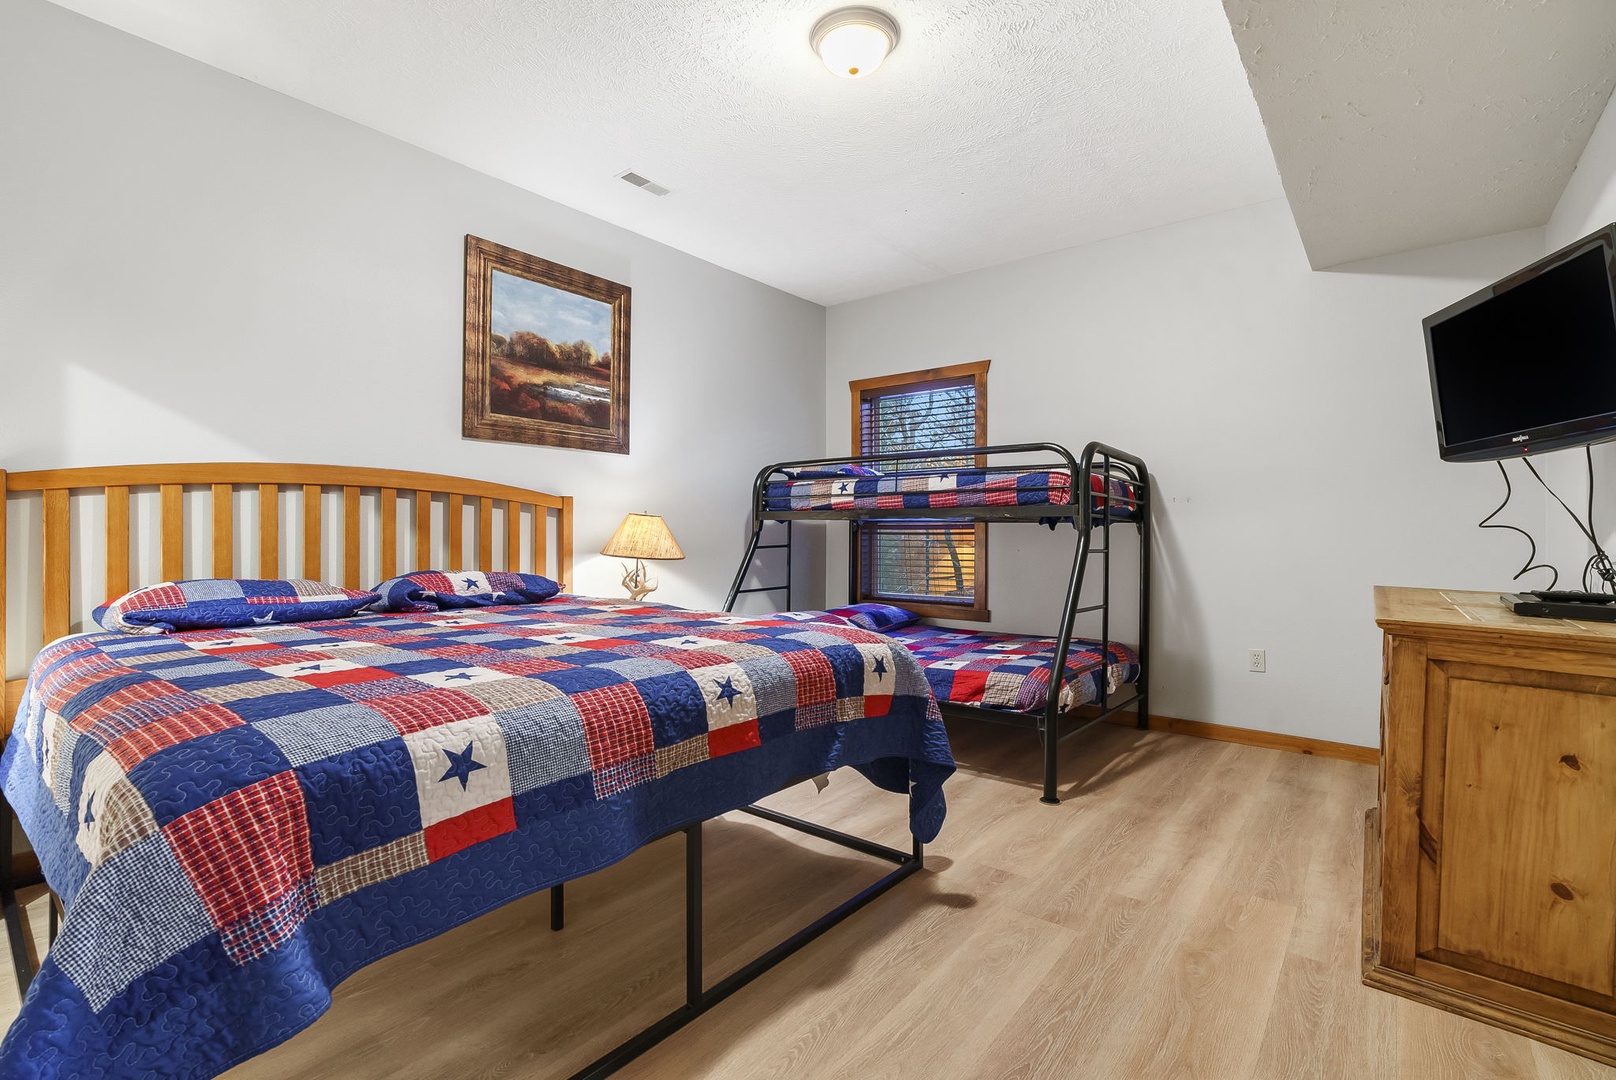 House 1 Bedroom #3 King with Bunk Bed Twin/Full